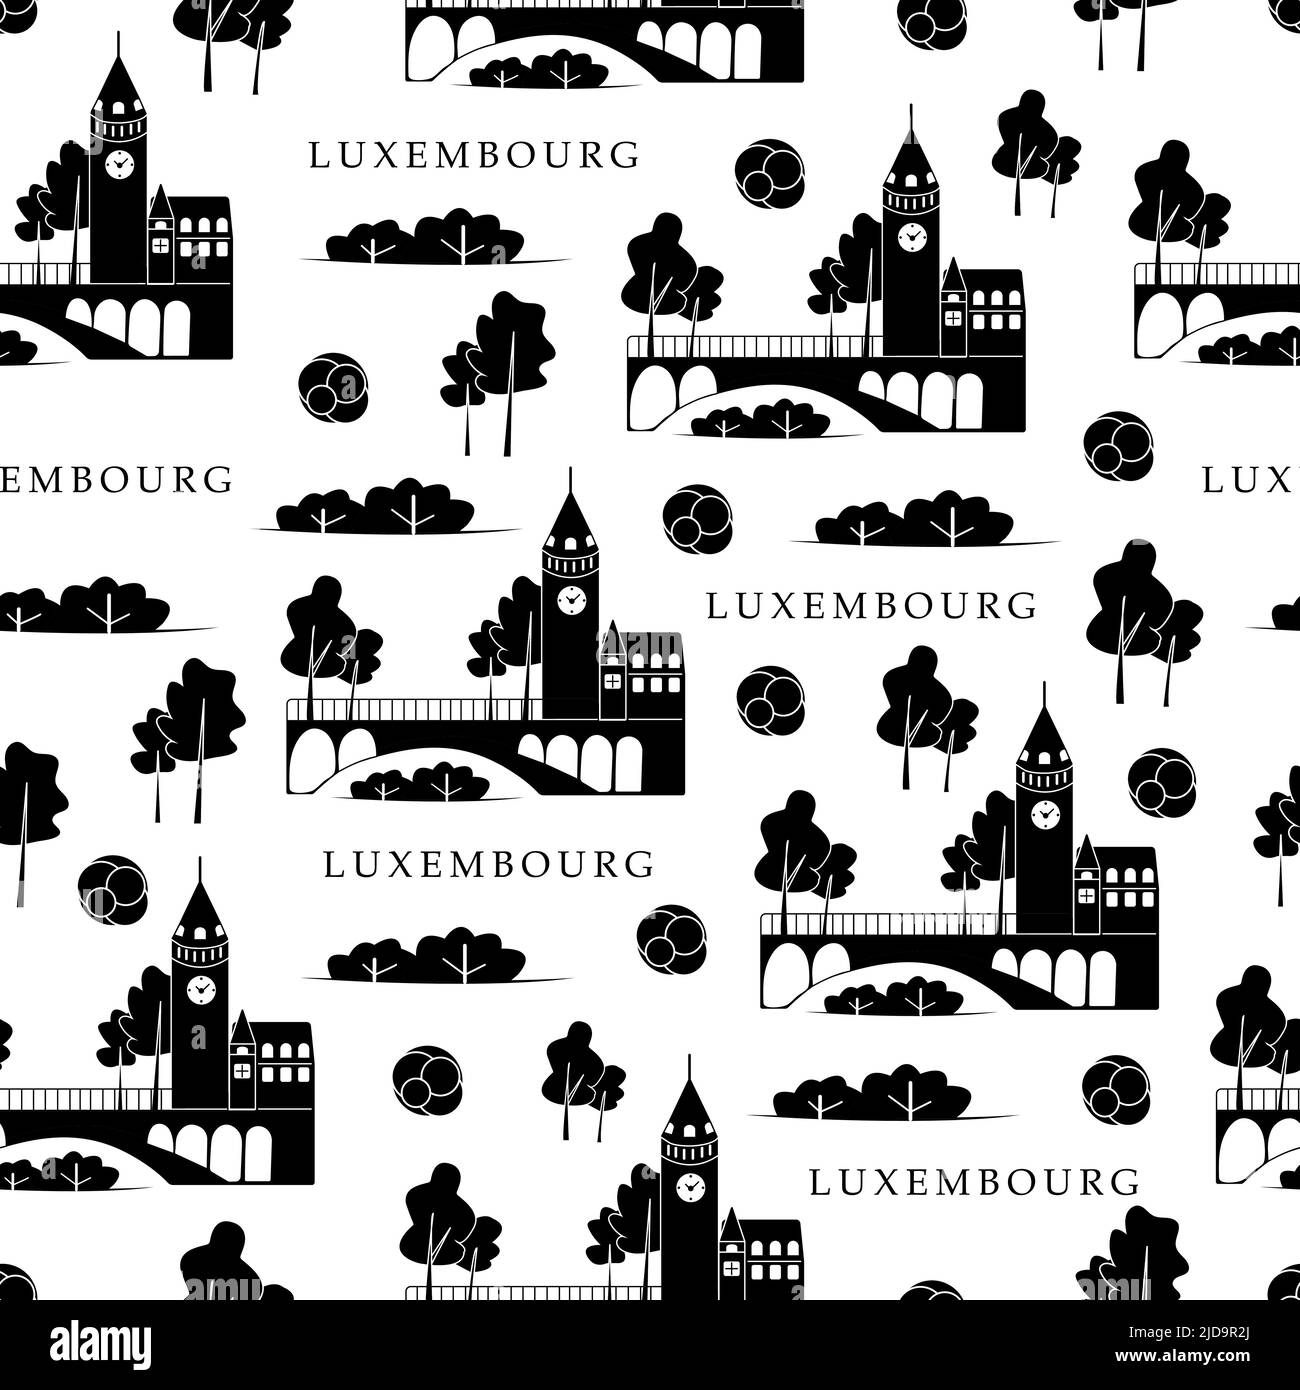 European capitals, Luxembourg. Black and white illustration Stock Vector